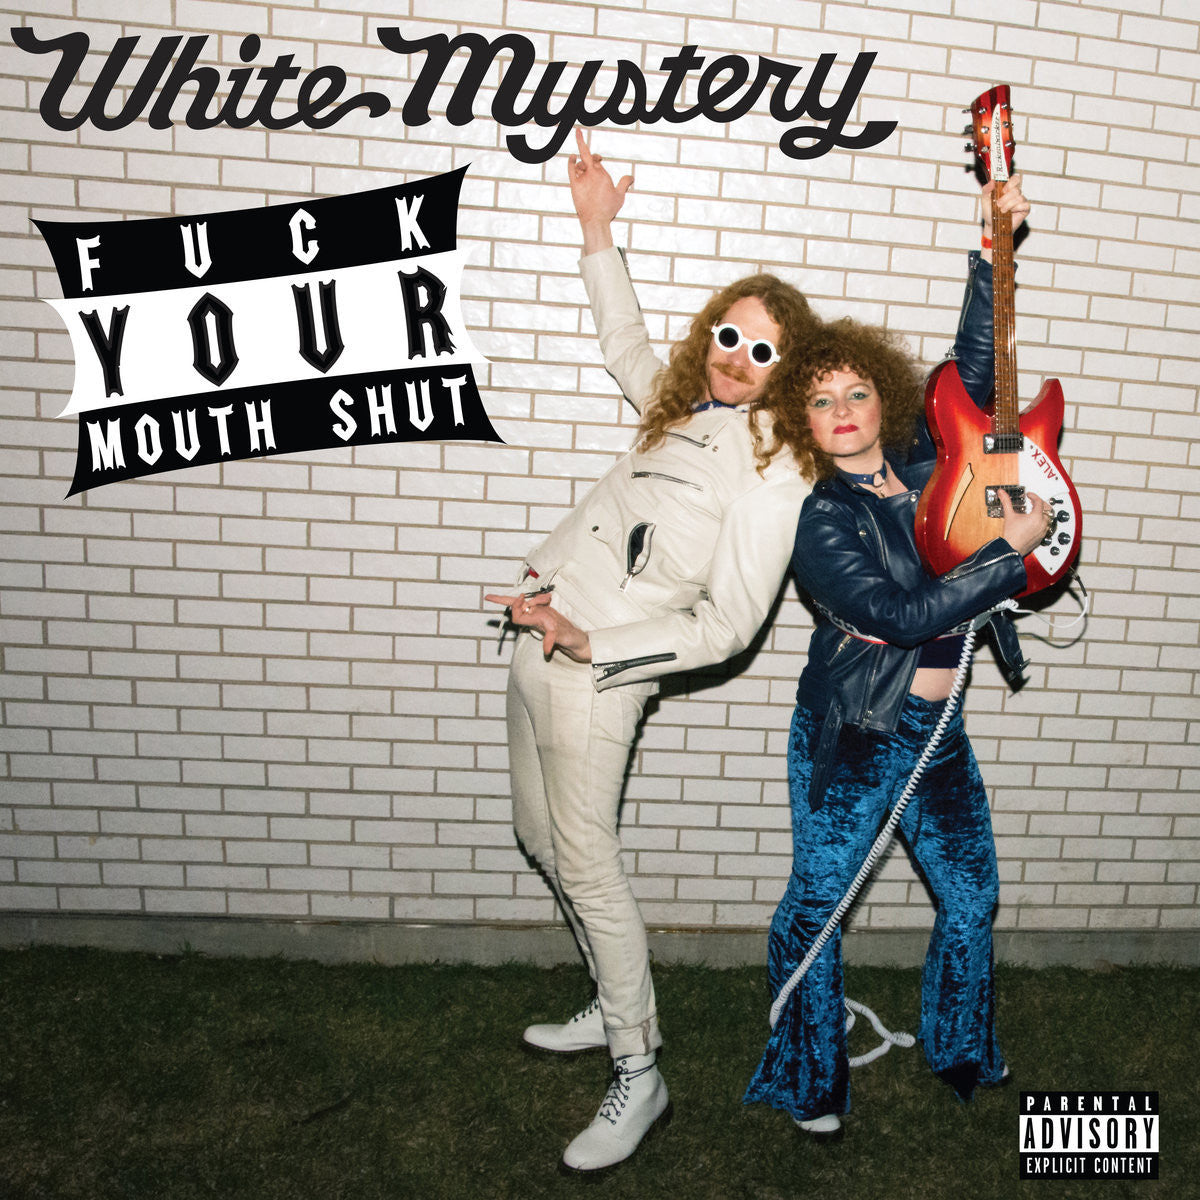 White Mystery ‎– Fuck Your Mouth Shut - New Vinyl Record 2017 White Mystery Pressing on Assorted Colors - Chicago, IL Garage Rock / Contemporary Punk